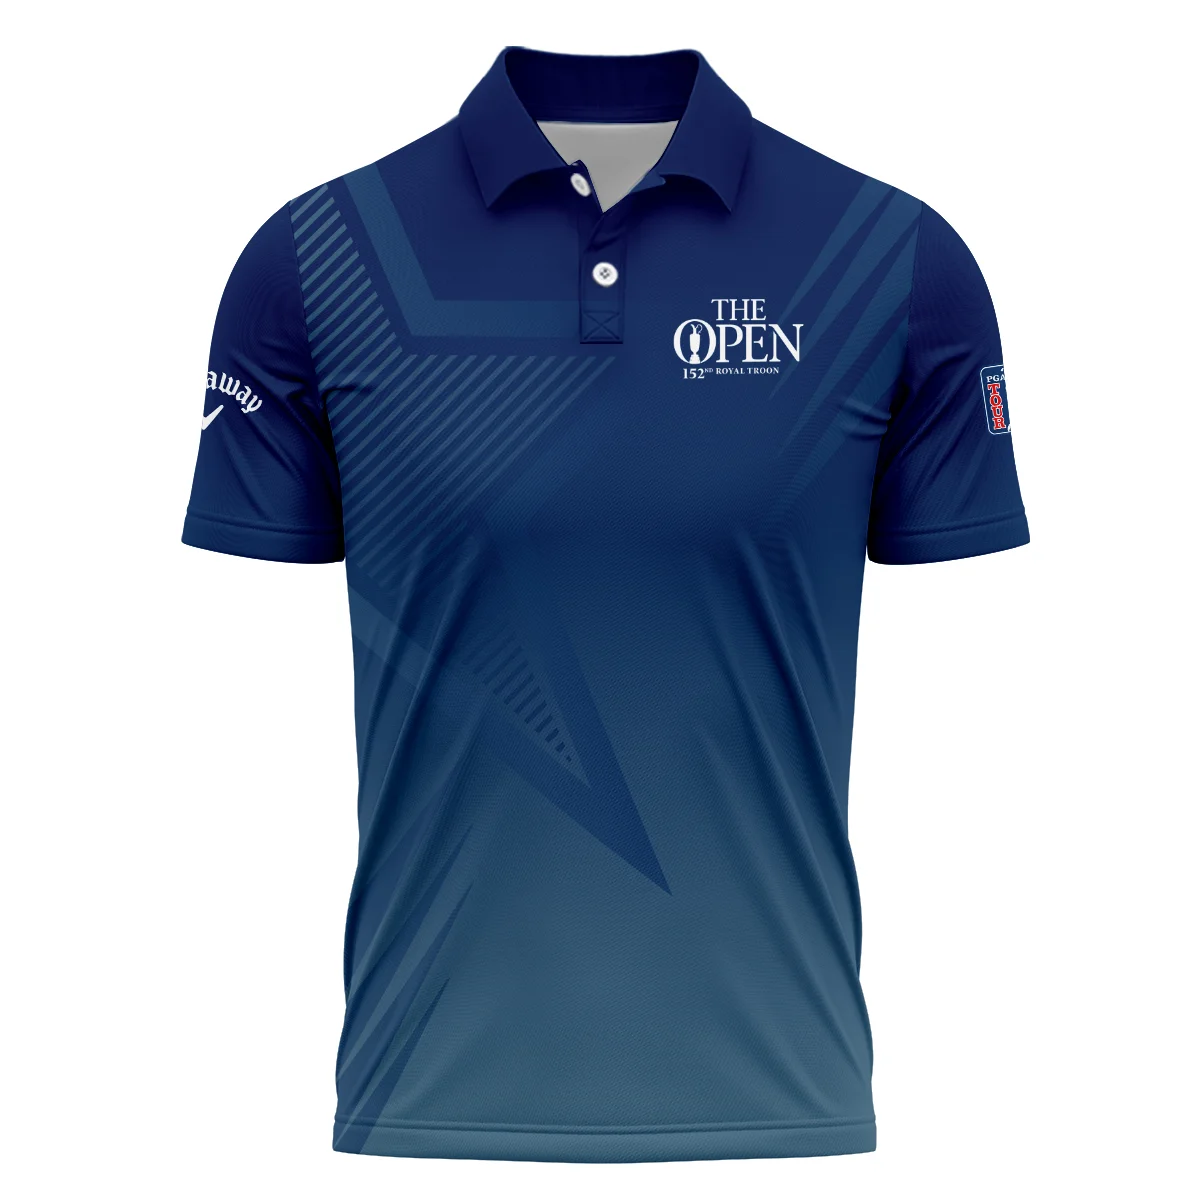 Callaway 152nd Open Championship Abstract Background Dark Blue Gradient Star Line Hoodie Shirt All Over Prints HOTOP260624A04CLWHD